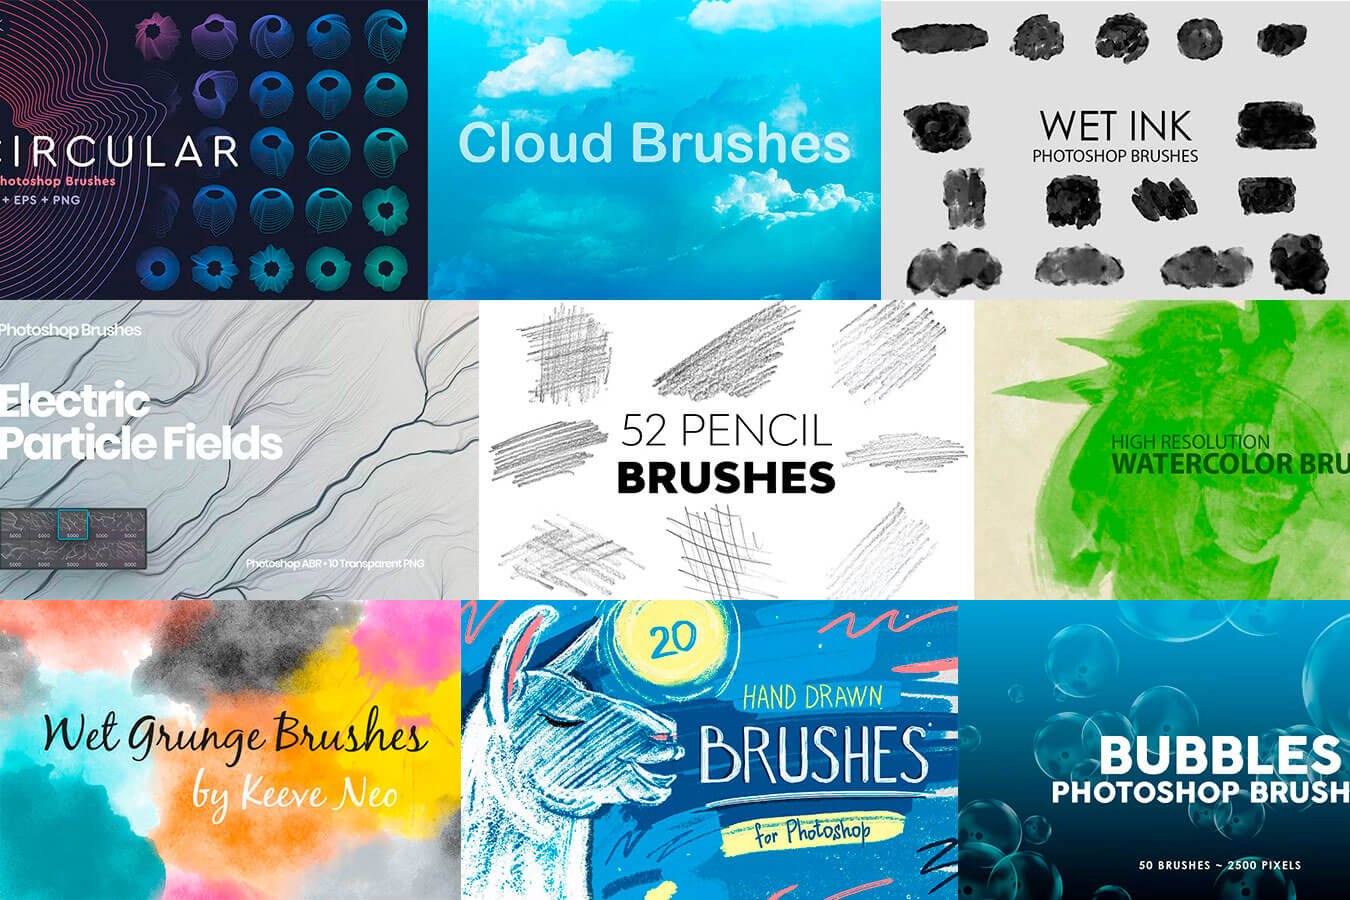 brushes to download on photoshop from instagram artists